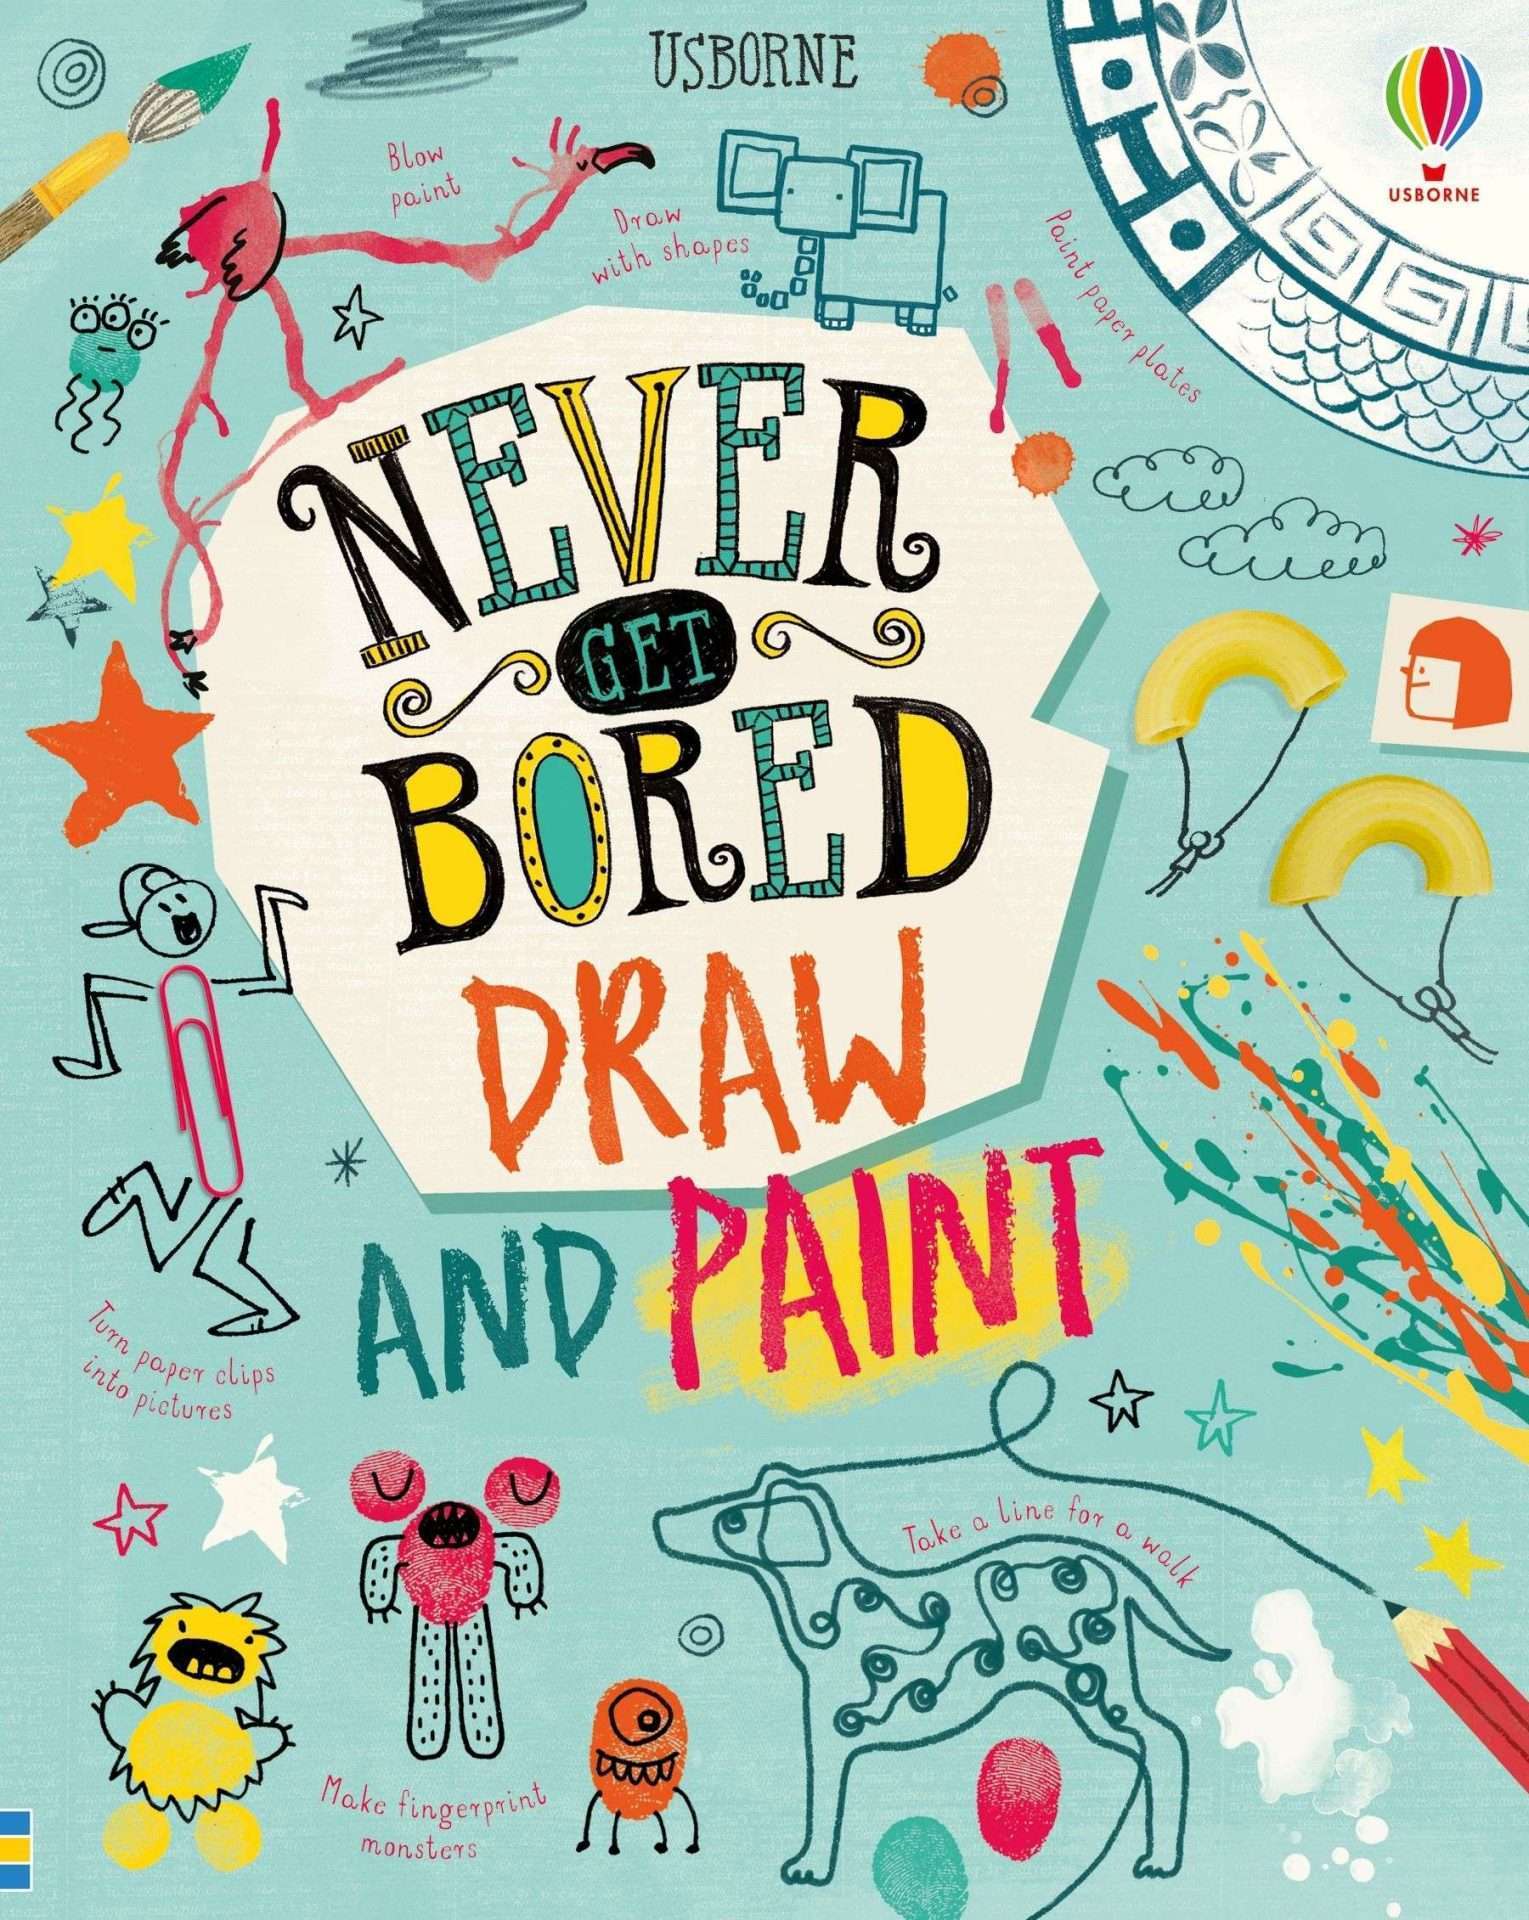 Usborne Never Get Bored - Draw and Paint - Book